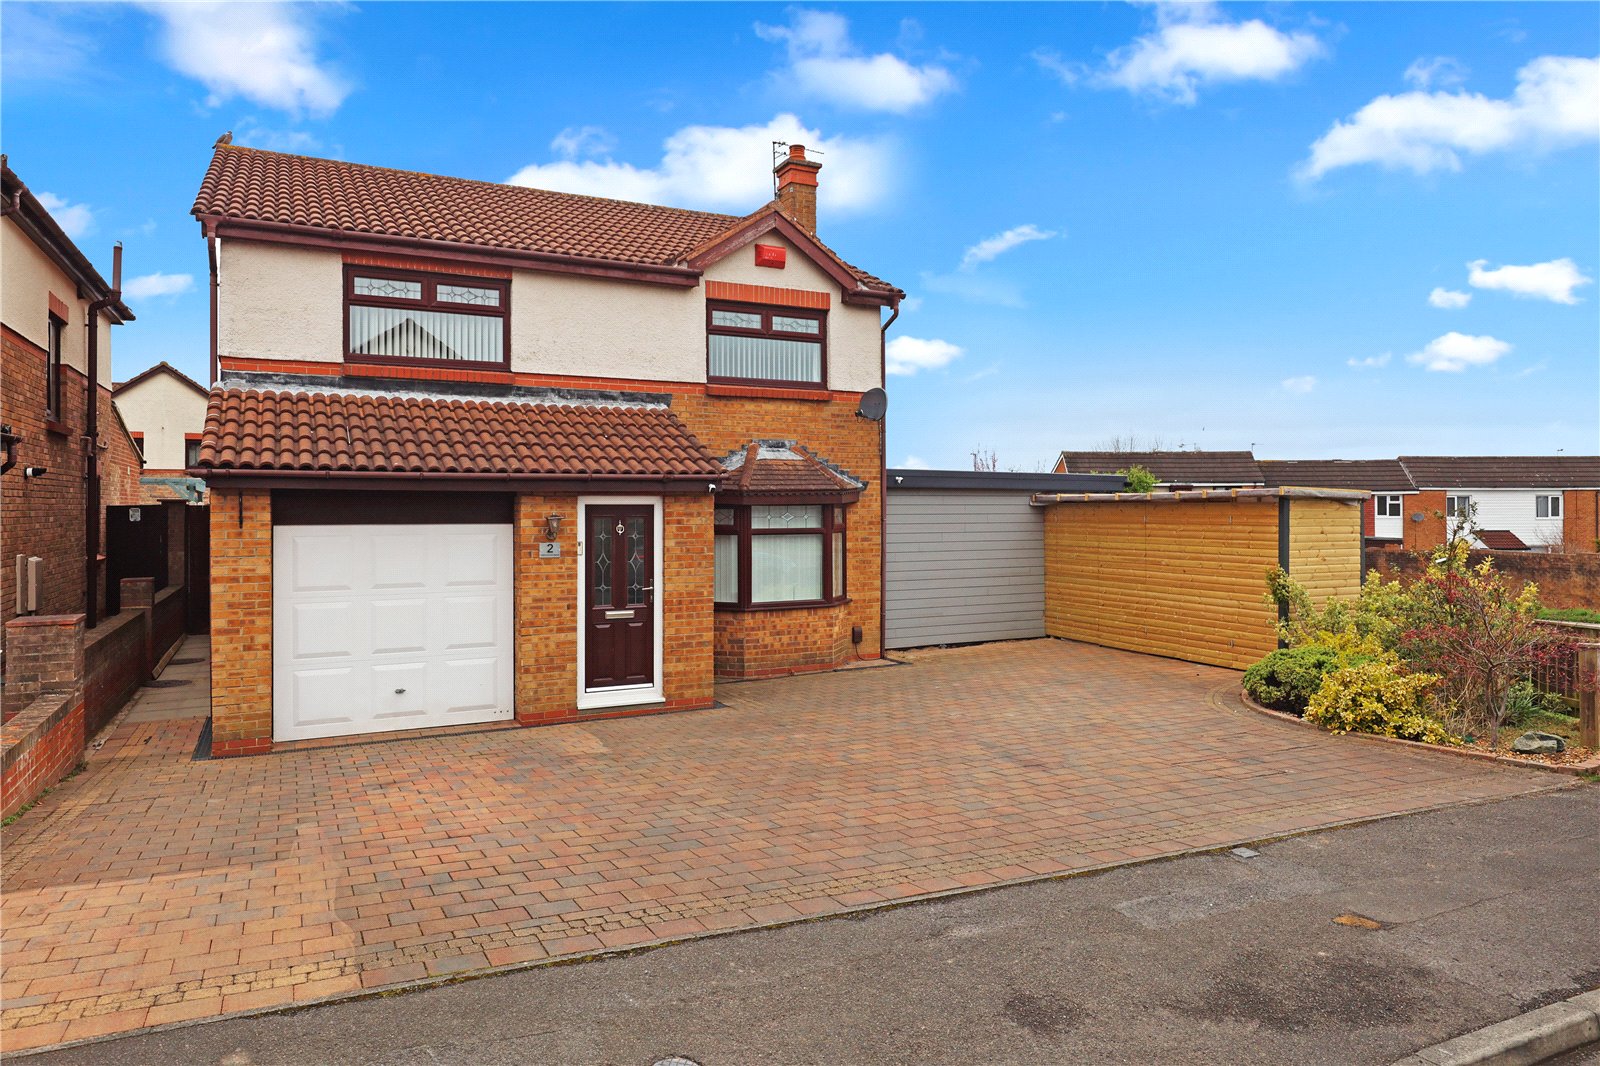 4 bed house for sale in Endeavour Drive, Ormesby 1